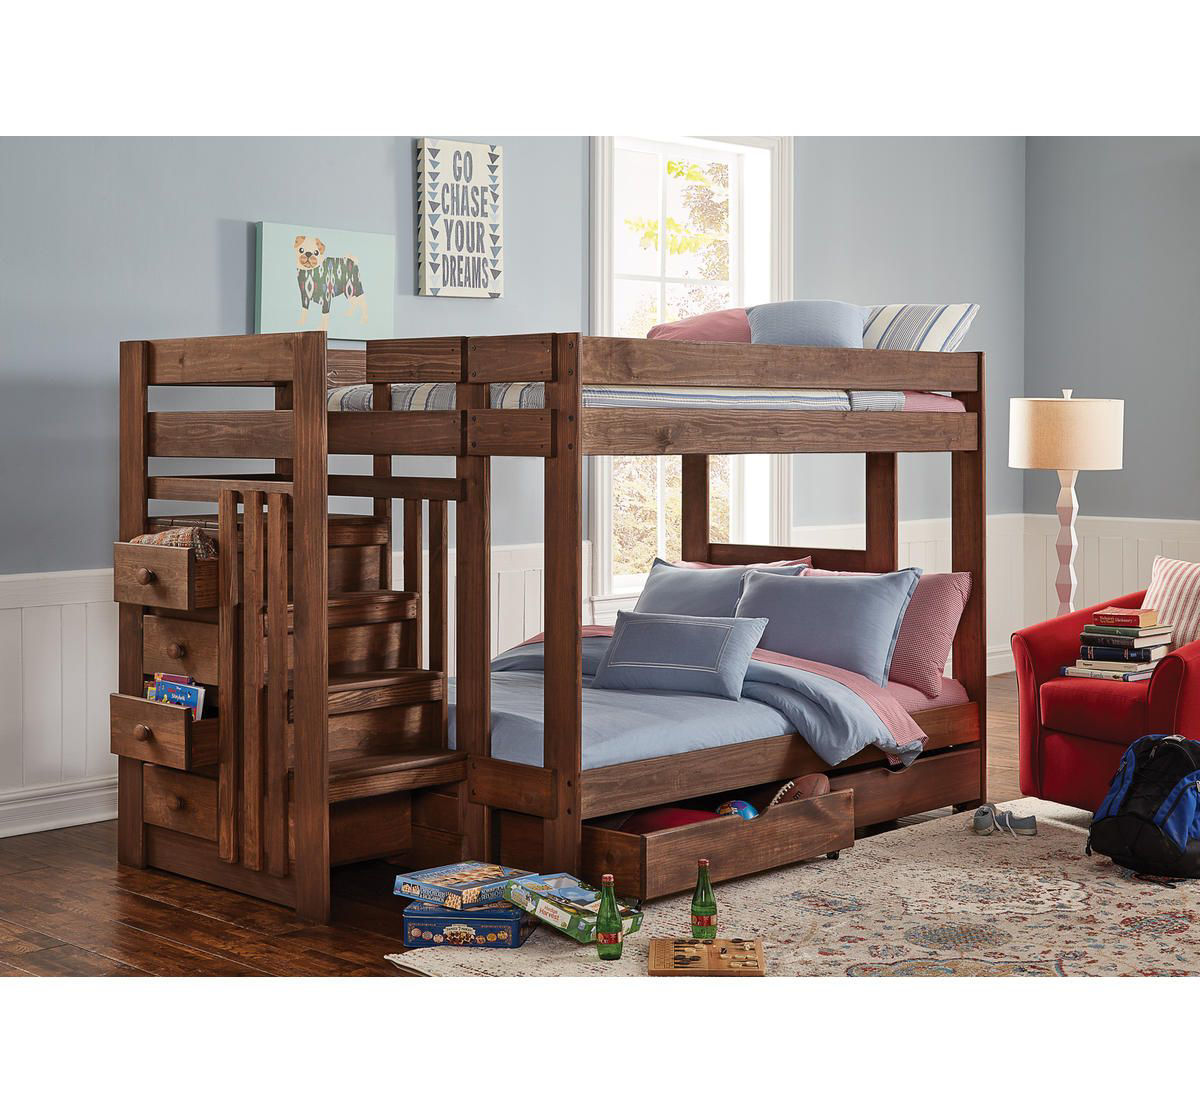 Baylee Full Stairbed Bad Home, Full Over Full Size Bunk Beds